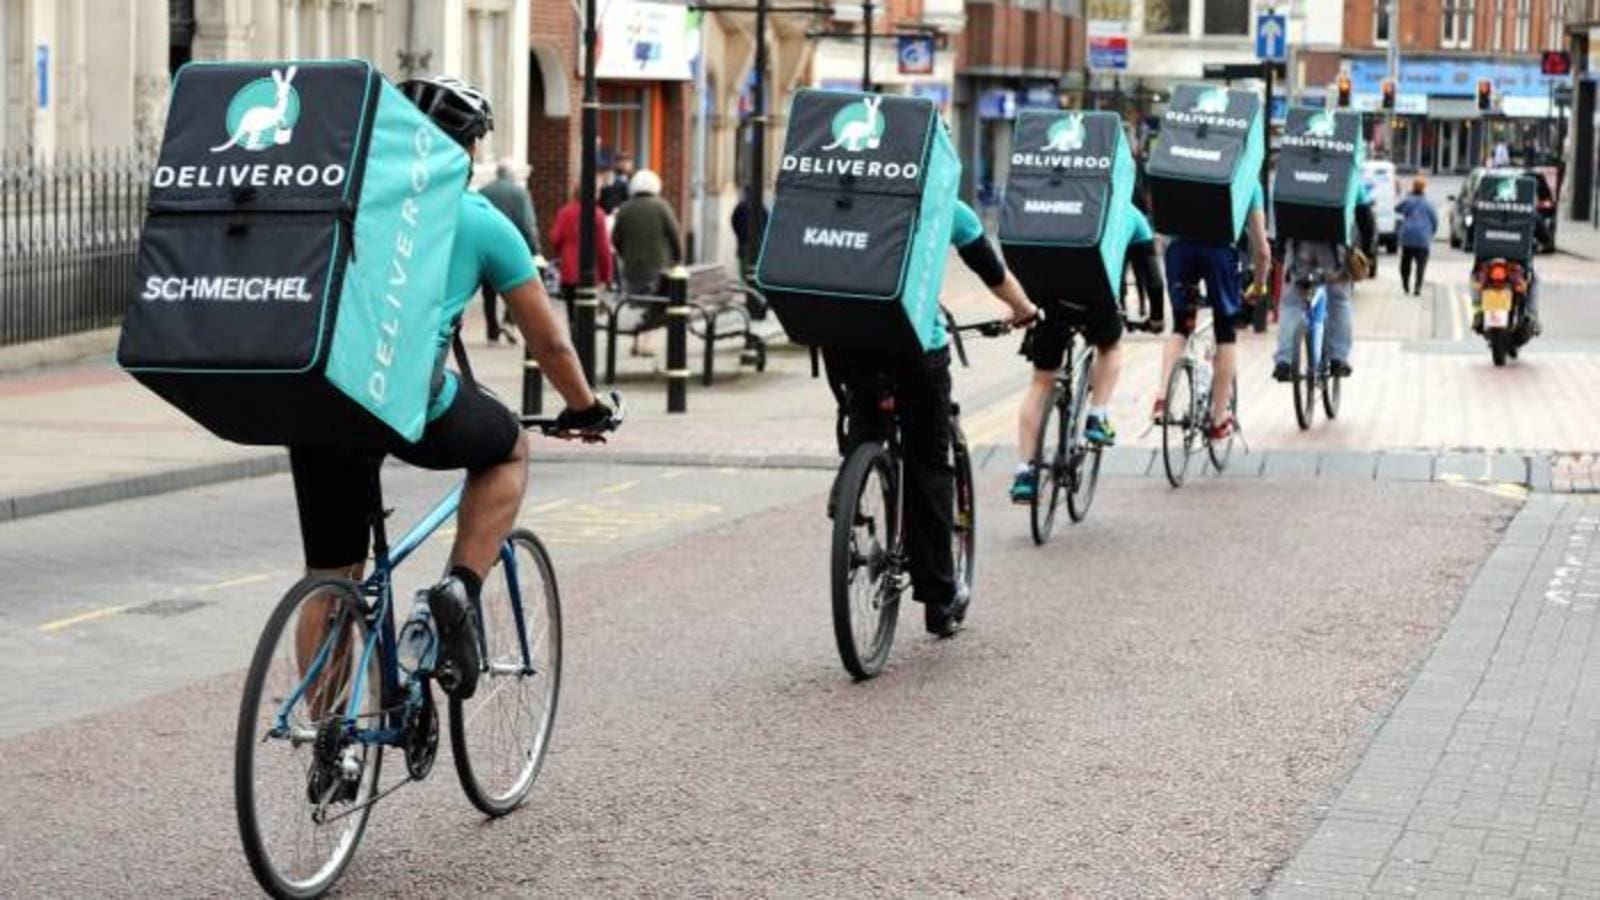 UK delivery startup Deliveroo mulls pulling out of Spain as GoPuff raises US$1Bn in latest funding round